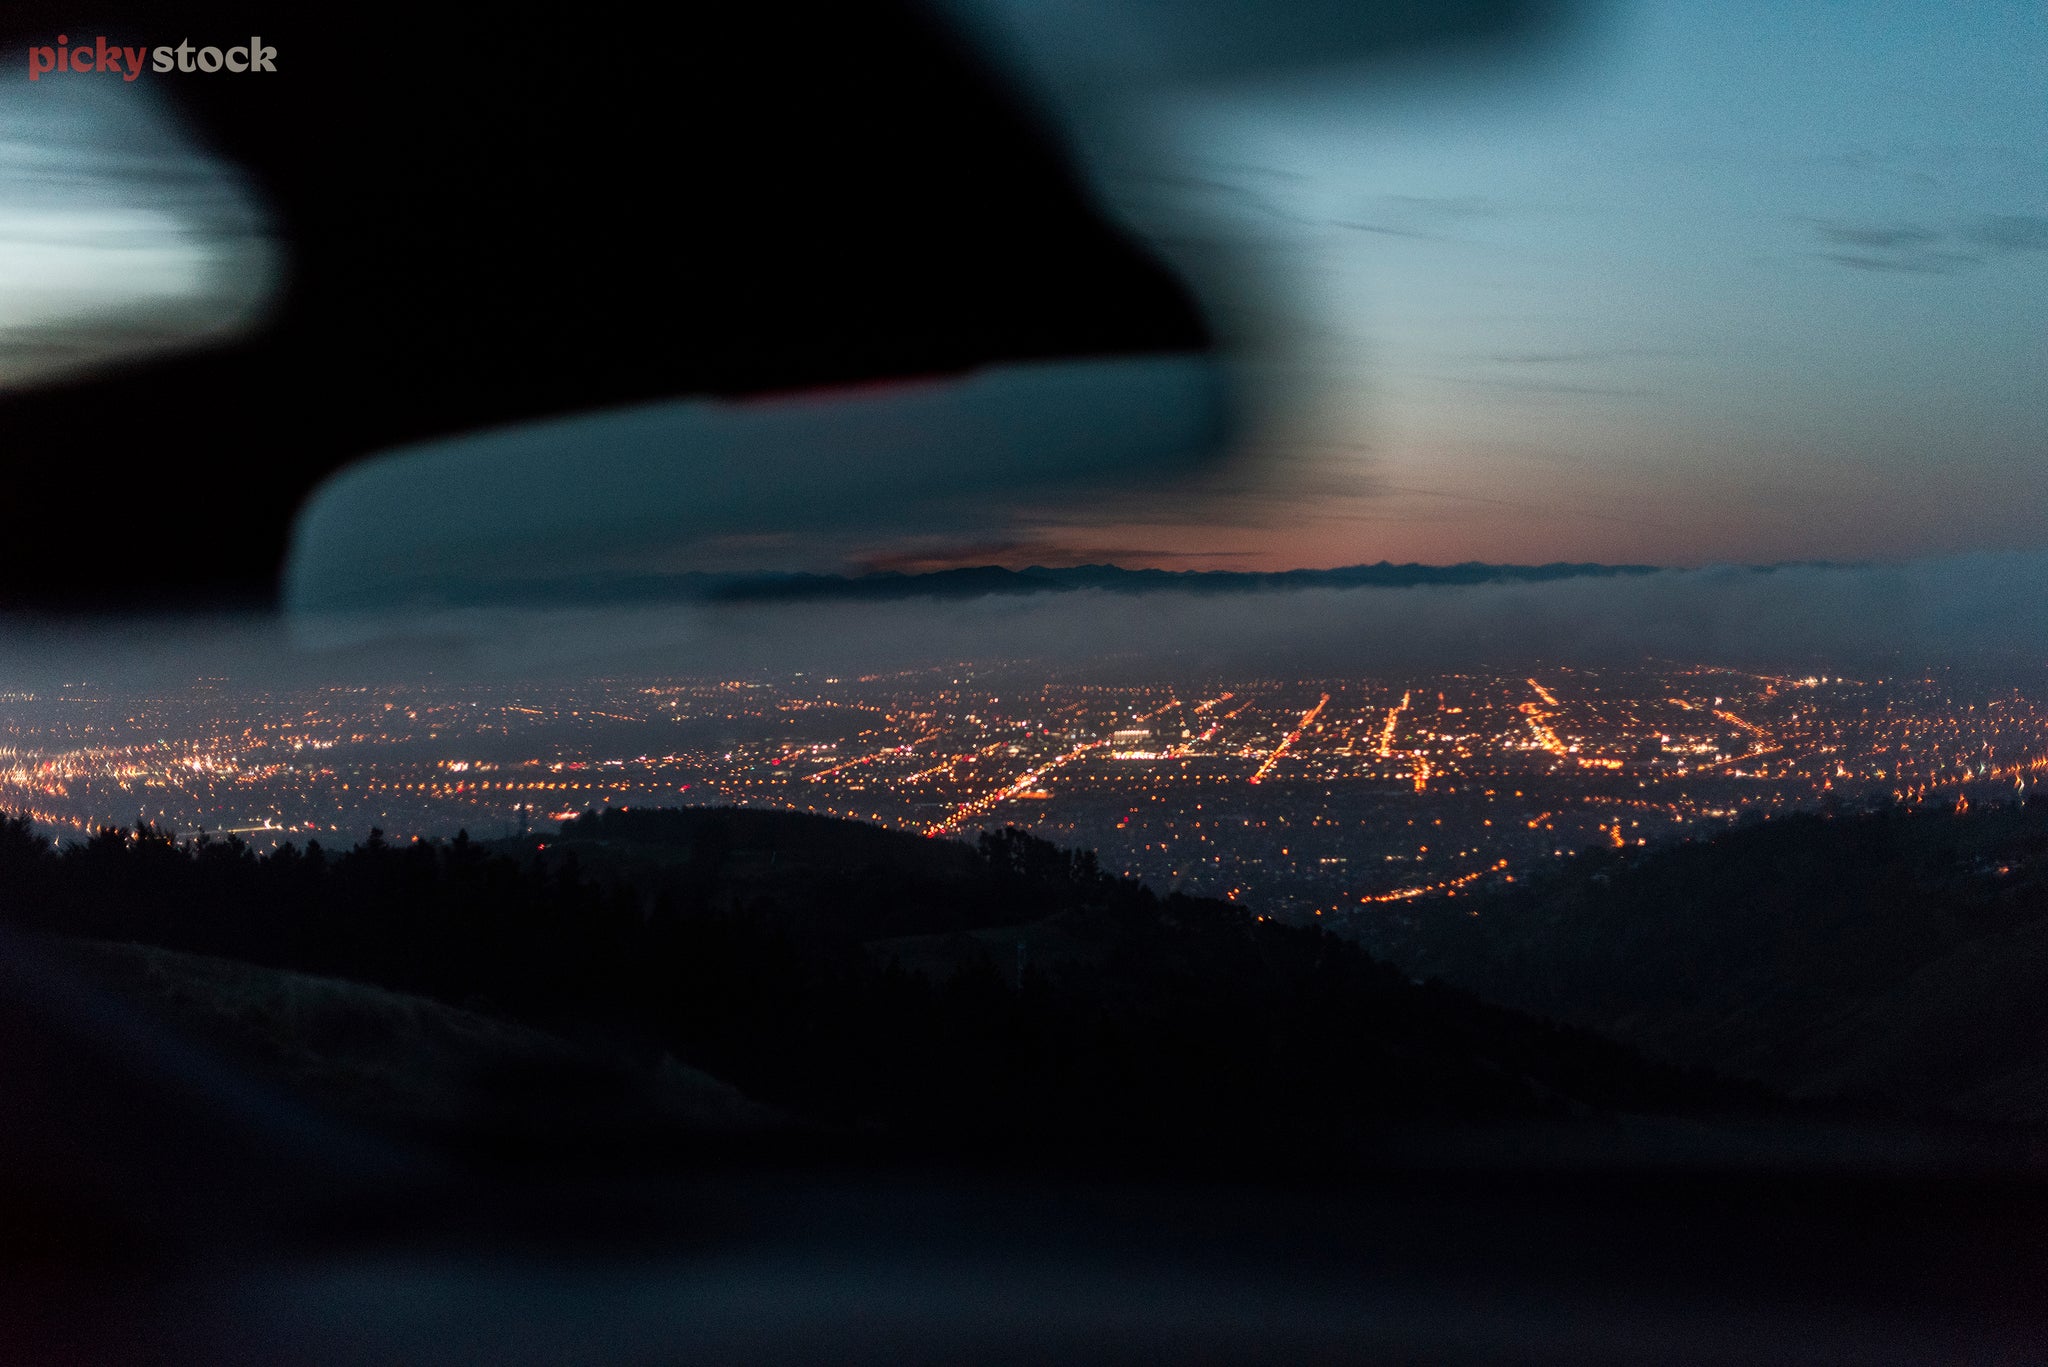 Shot from the front seat of a car of Christchurch on an early morning drive, the city lights shine through a fog.